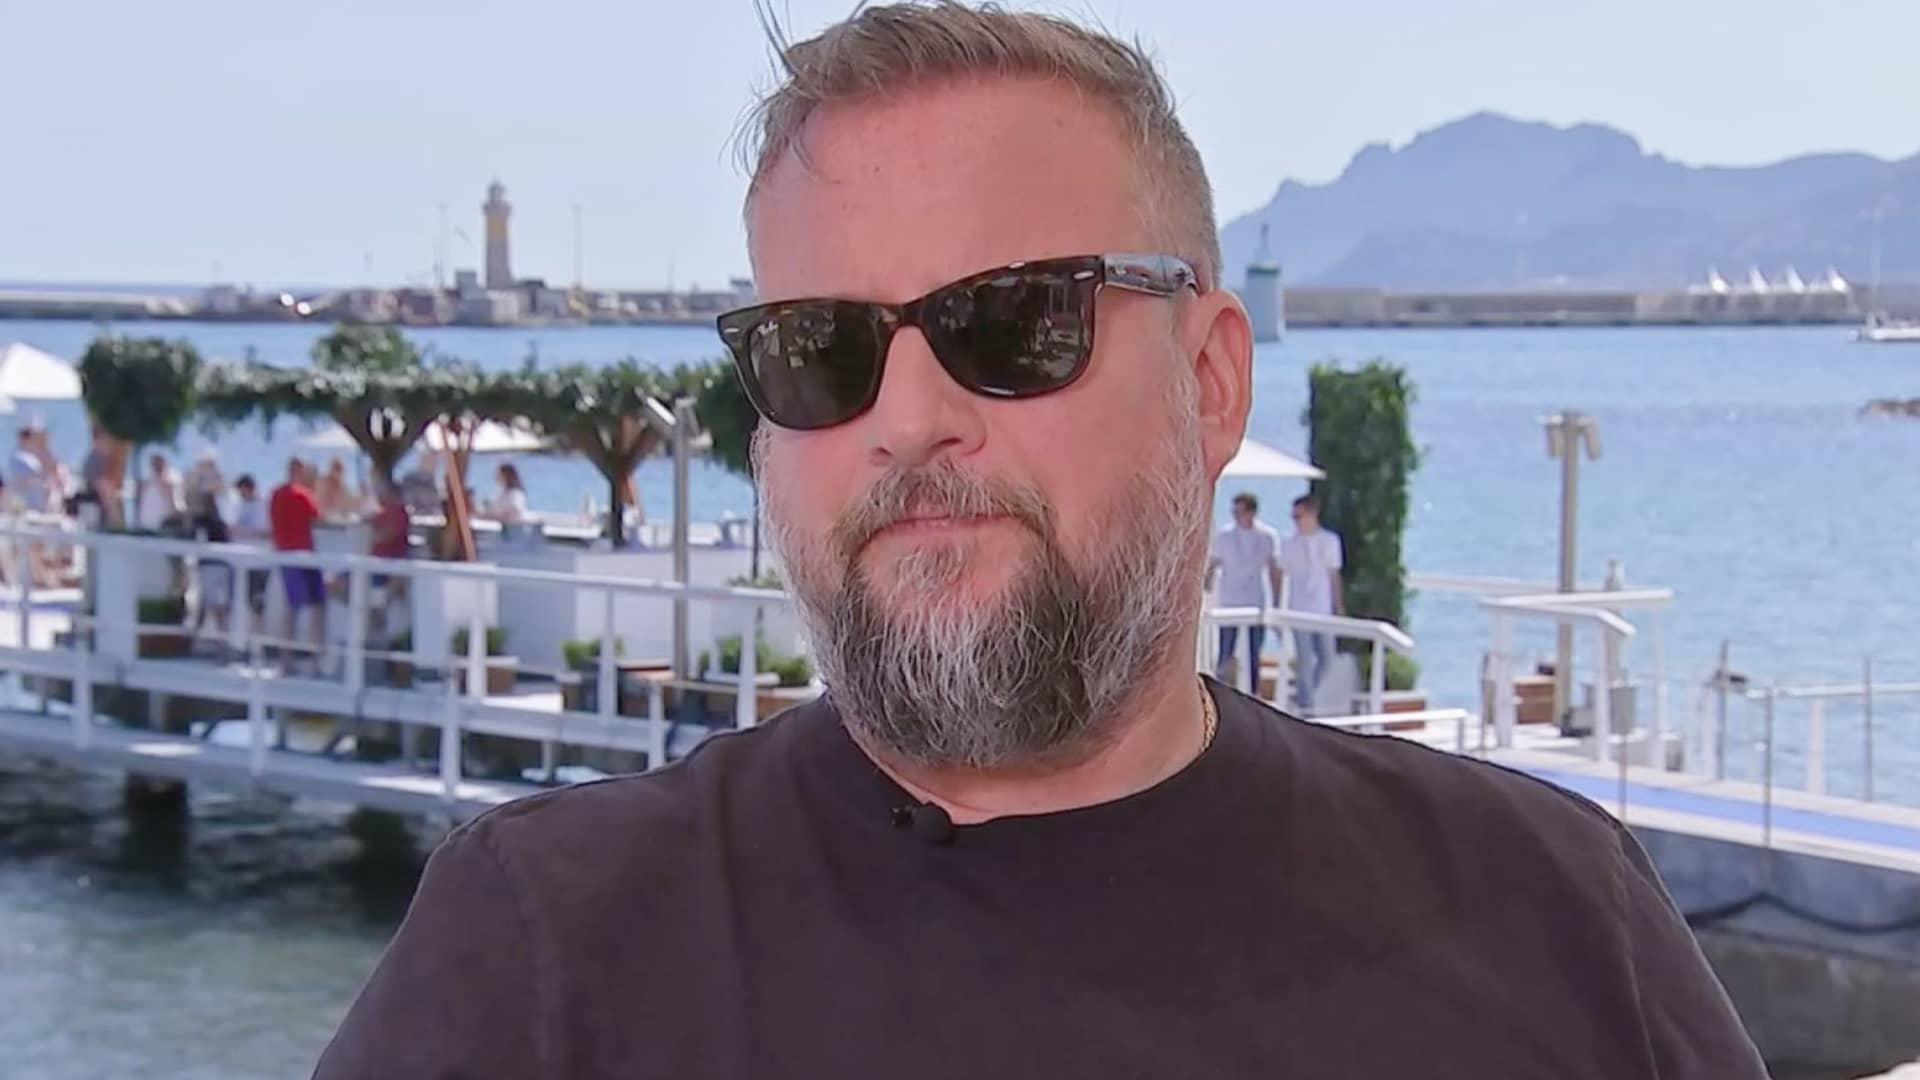 Shane Smith, co-founder of Vice.